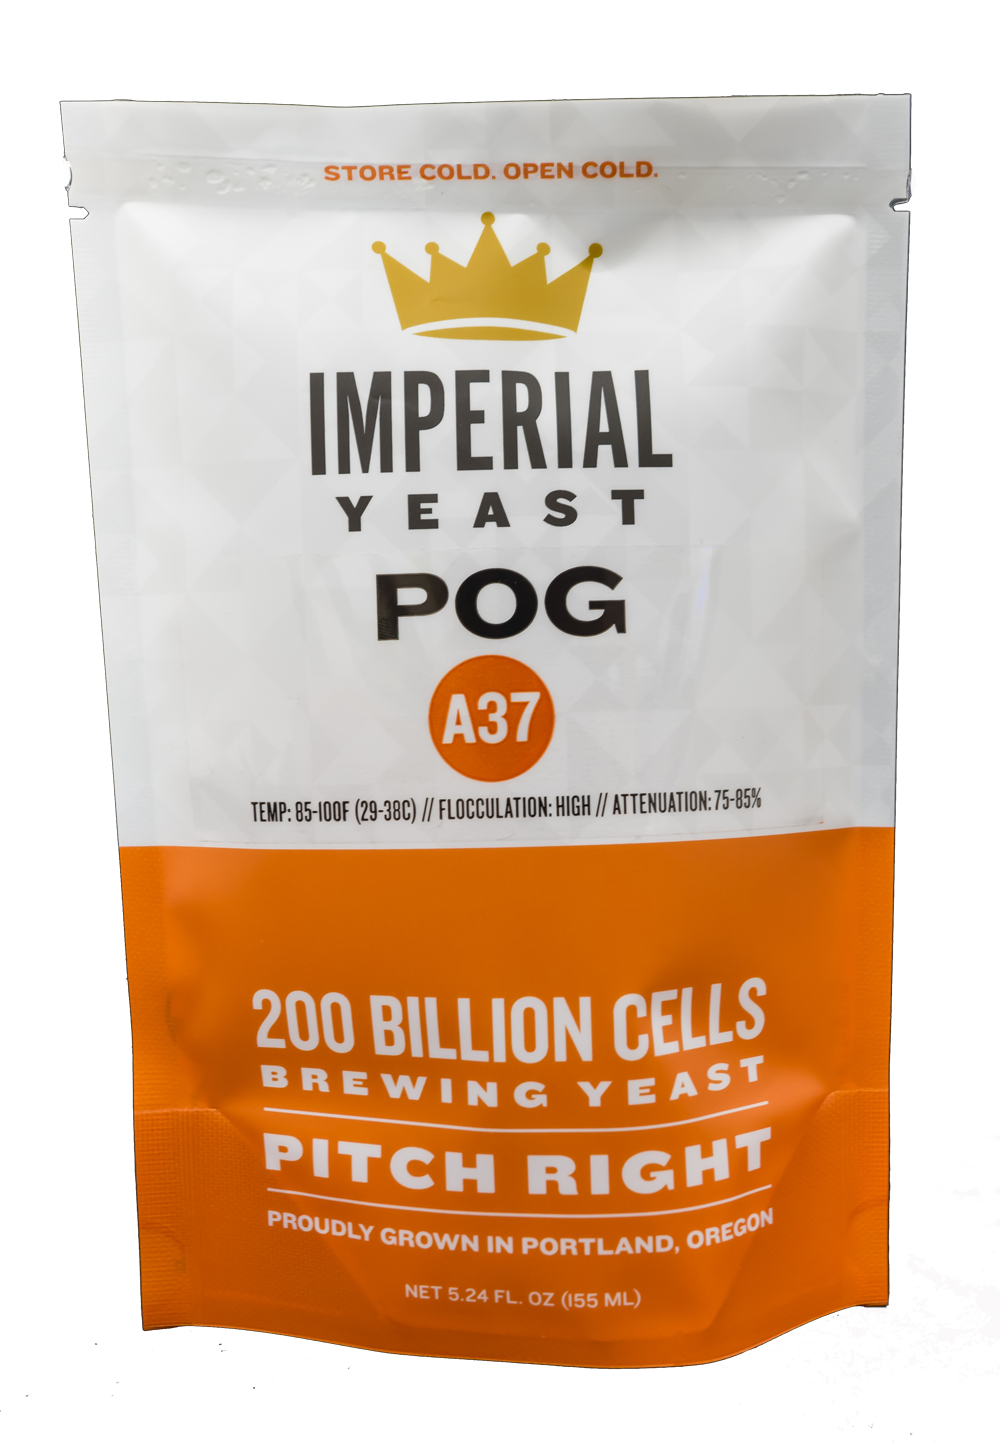 A37 POG Imperial Yeast pouch